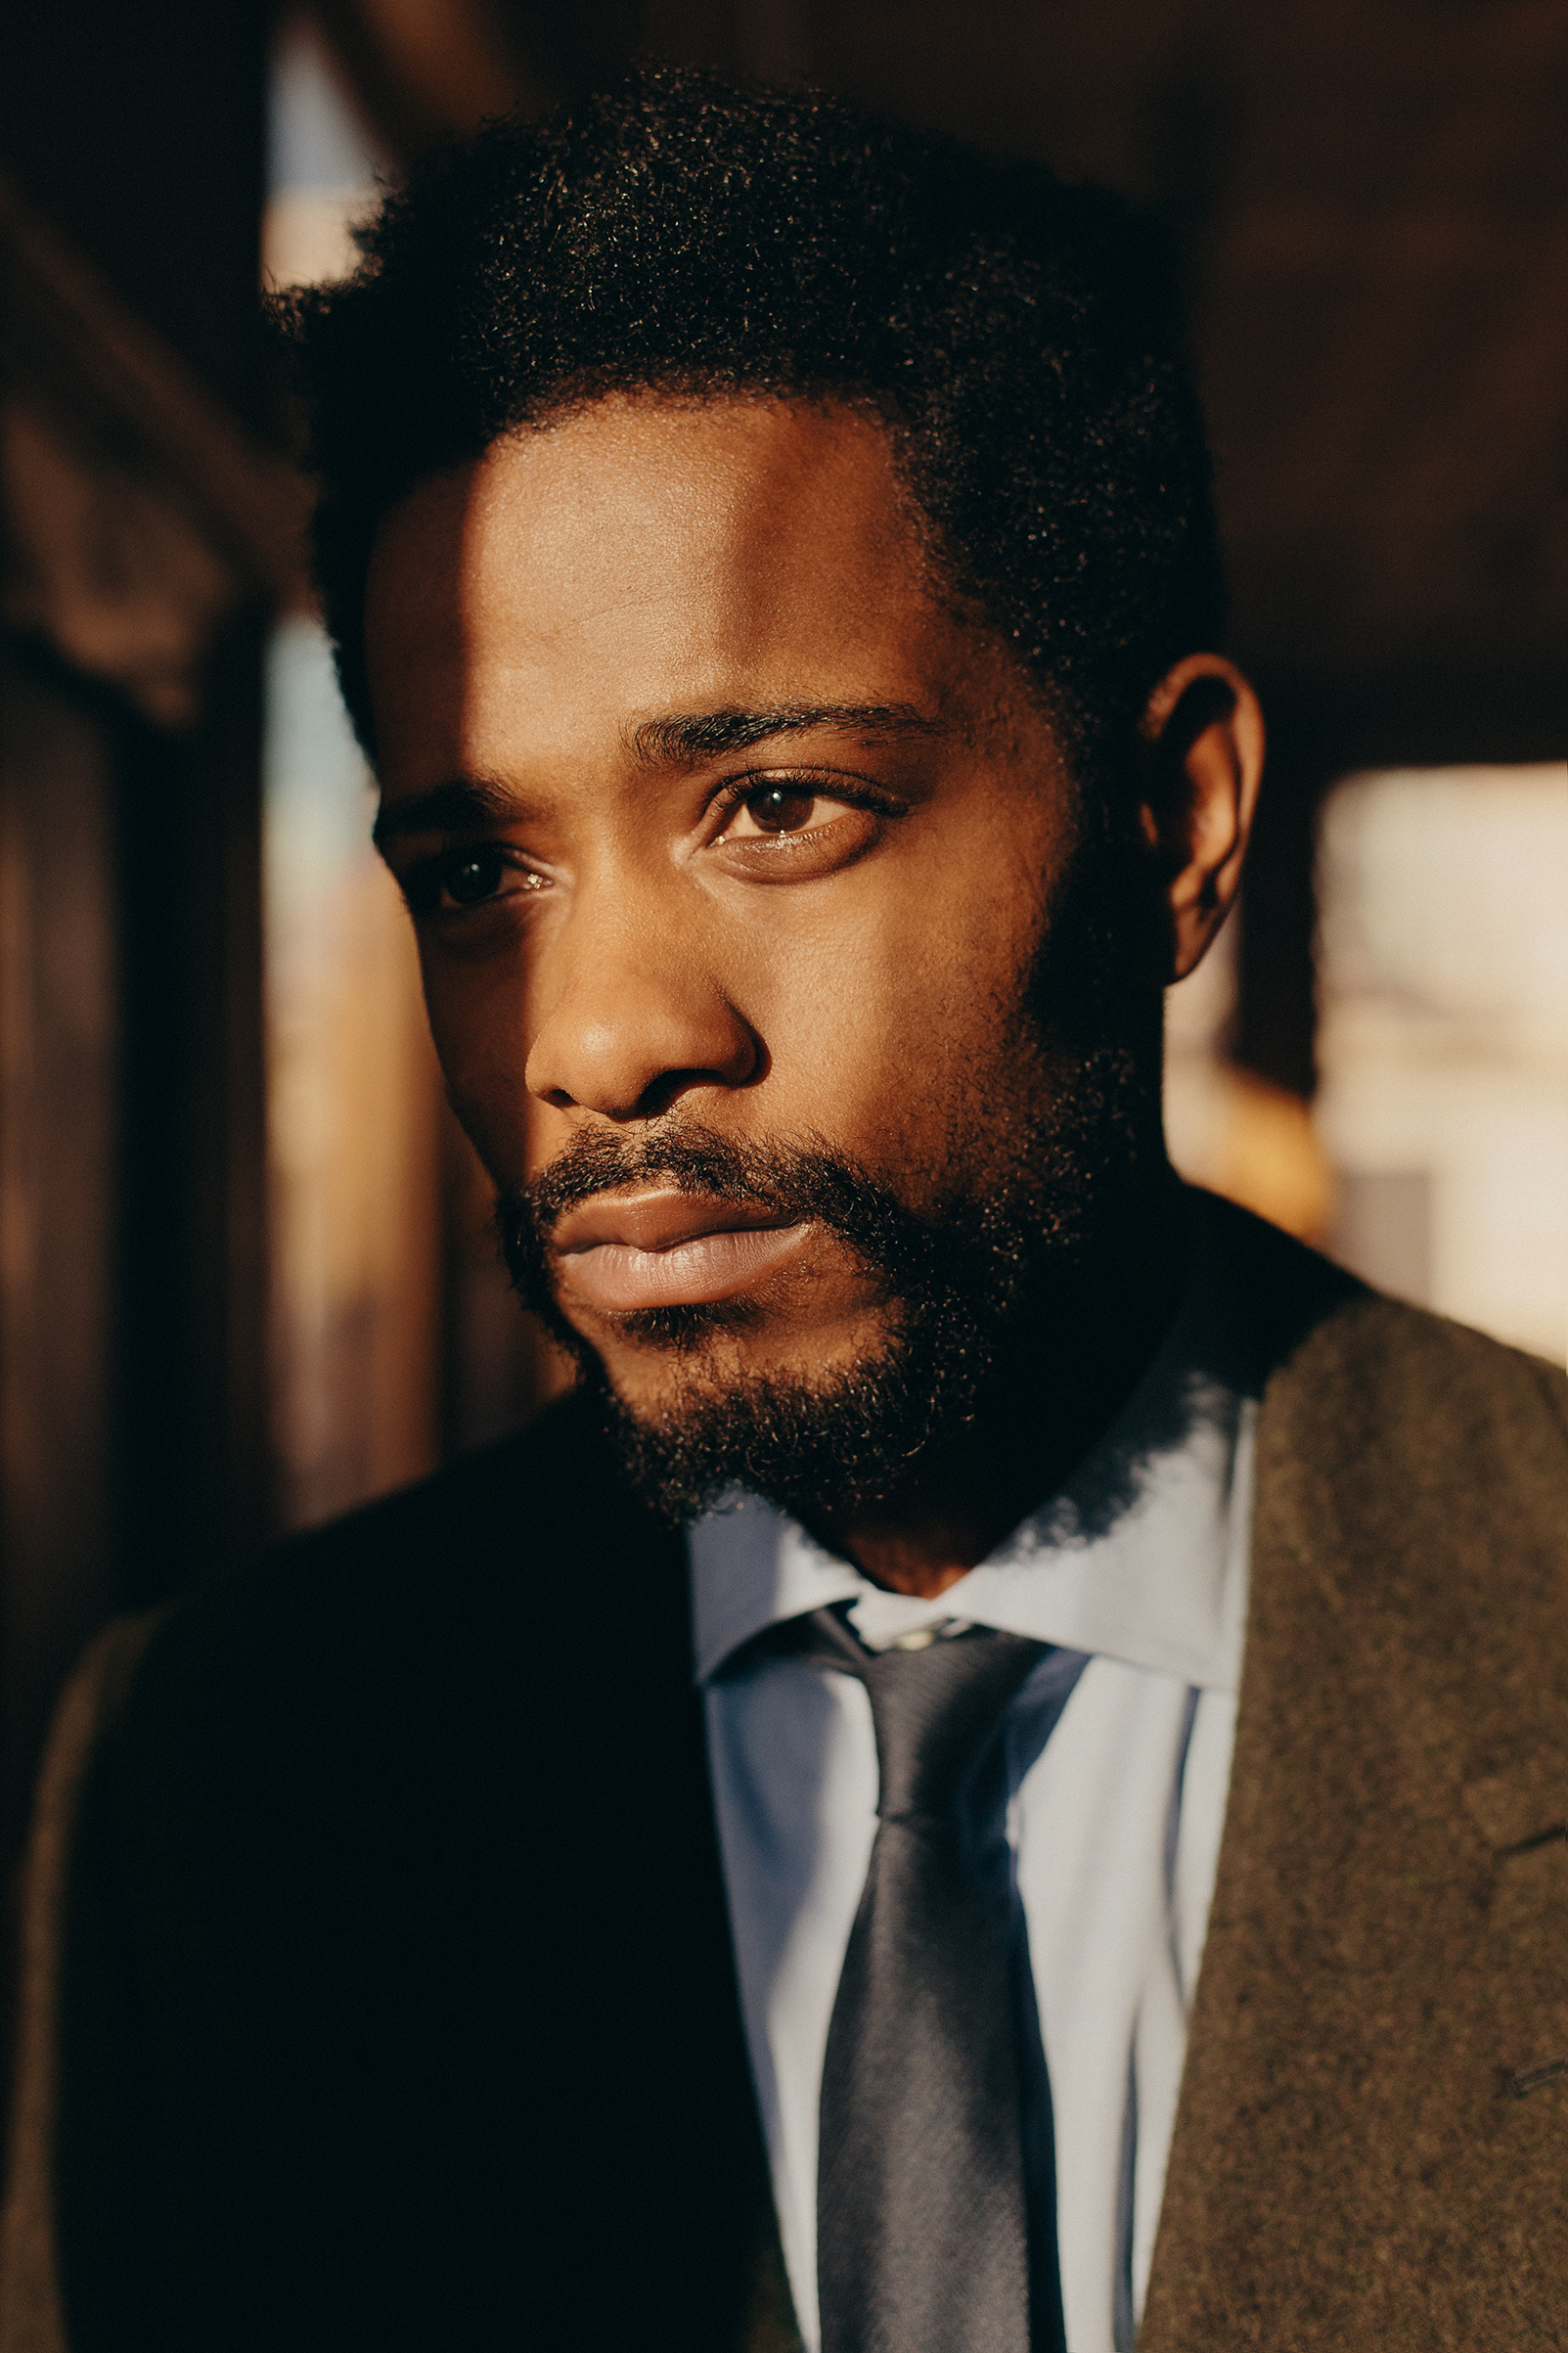 lakeith-stanfield-crown-heights-david-urbanke